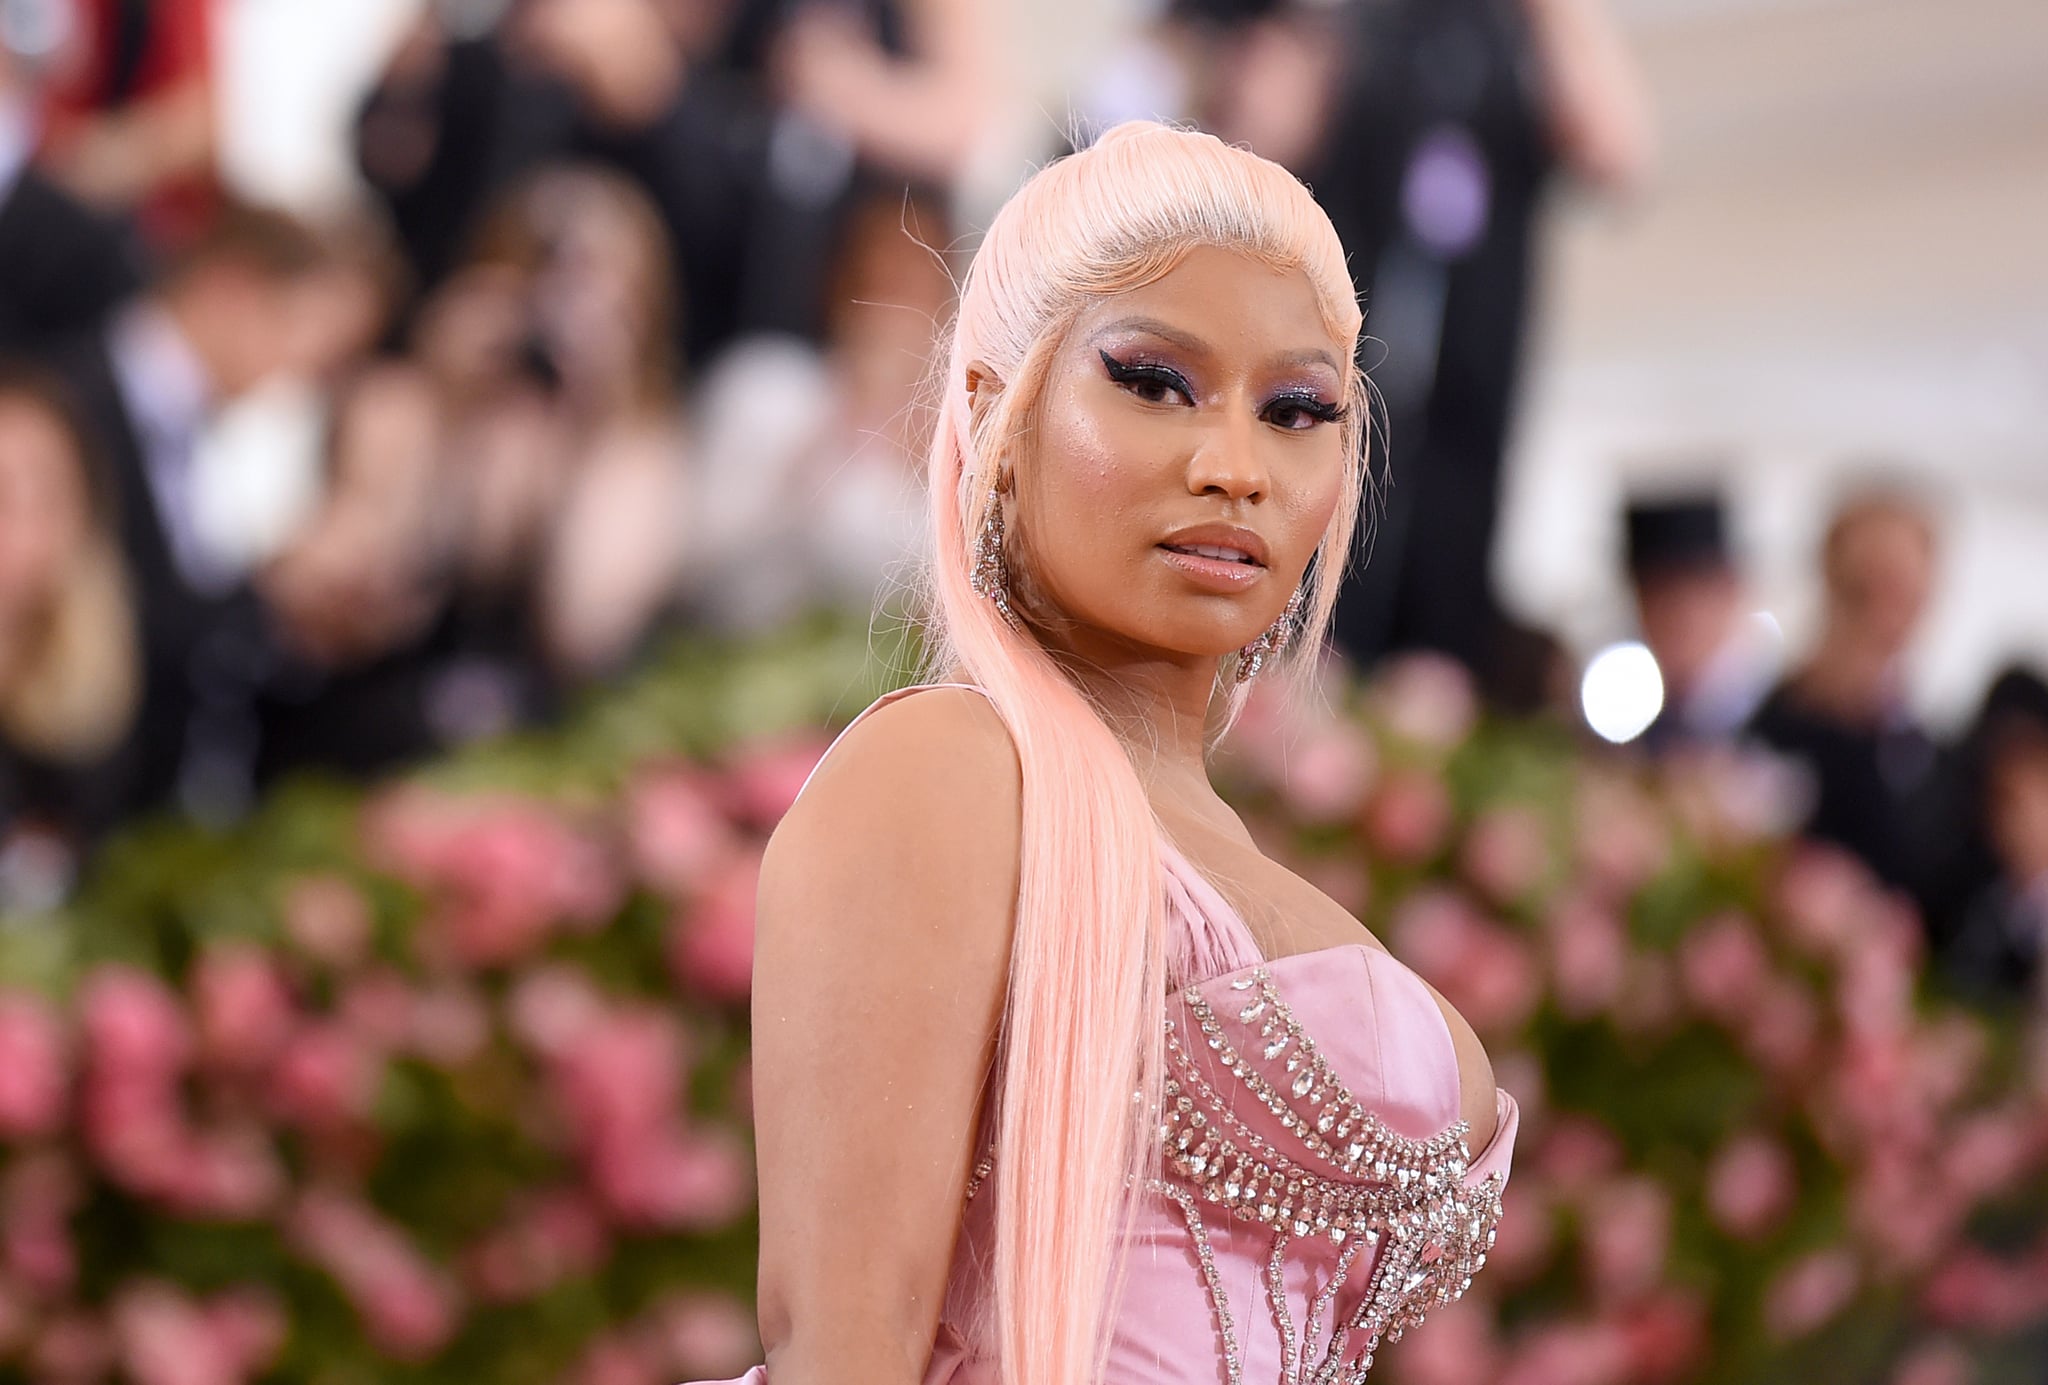 NEW YORK, NEW YORK - MAY 06: Nicki Minaj attends The 2019 Met Gala Celebrating Camp: Notes on Fashion at Metropolitan Museum of Art on May 06, 2019 in New York City. (Photo by Jamie McCarthy/Getty Images)